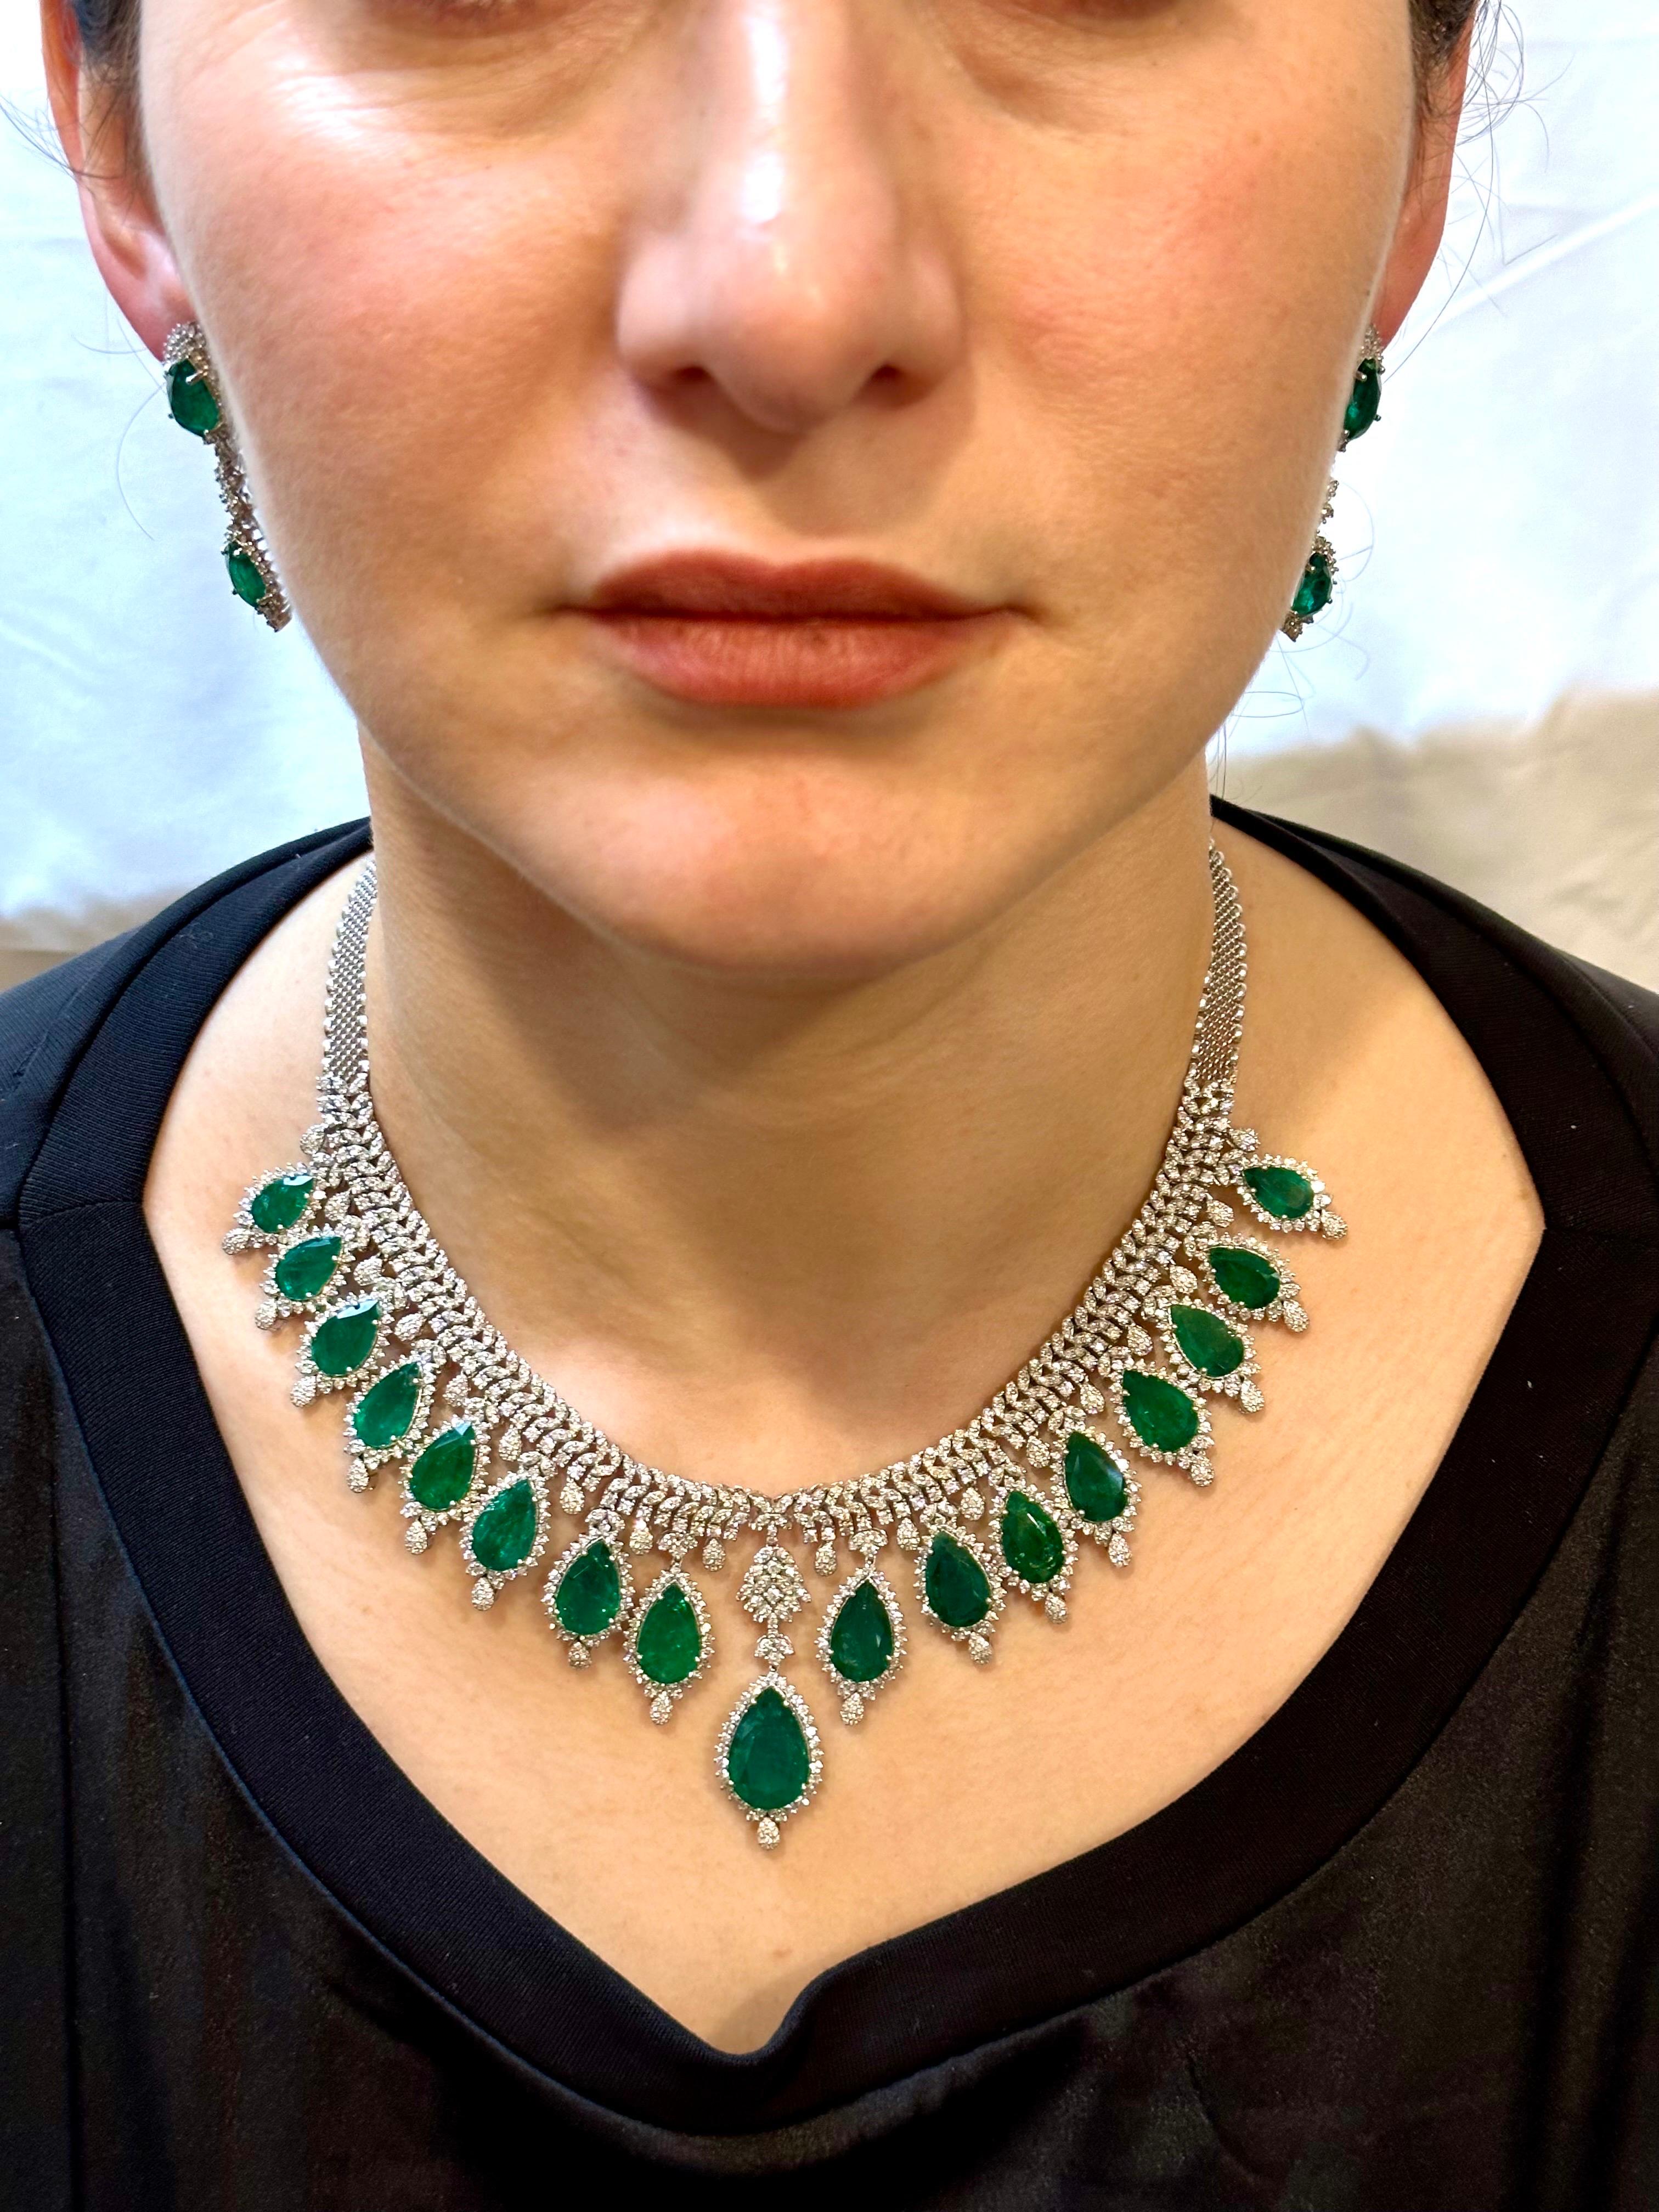 73ct Zambian Emerald and 22ct Diamond Necklace and Earring Bridal Suite For Sale 7